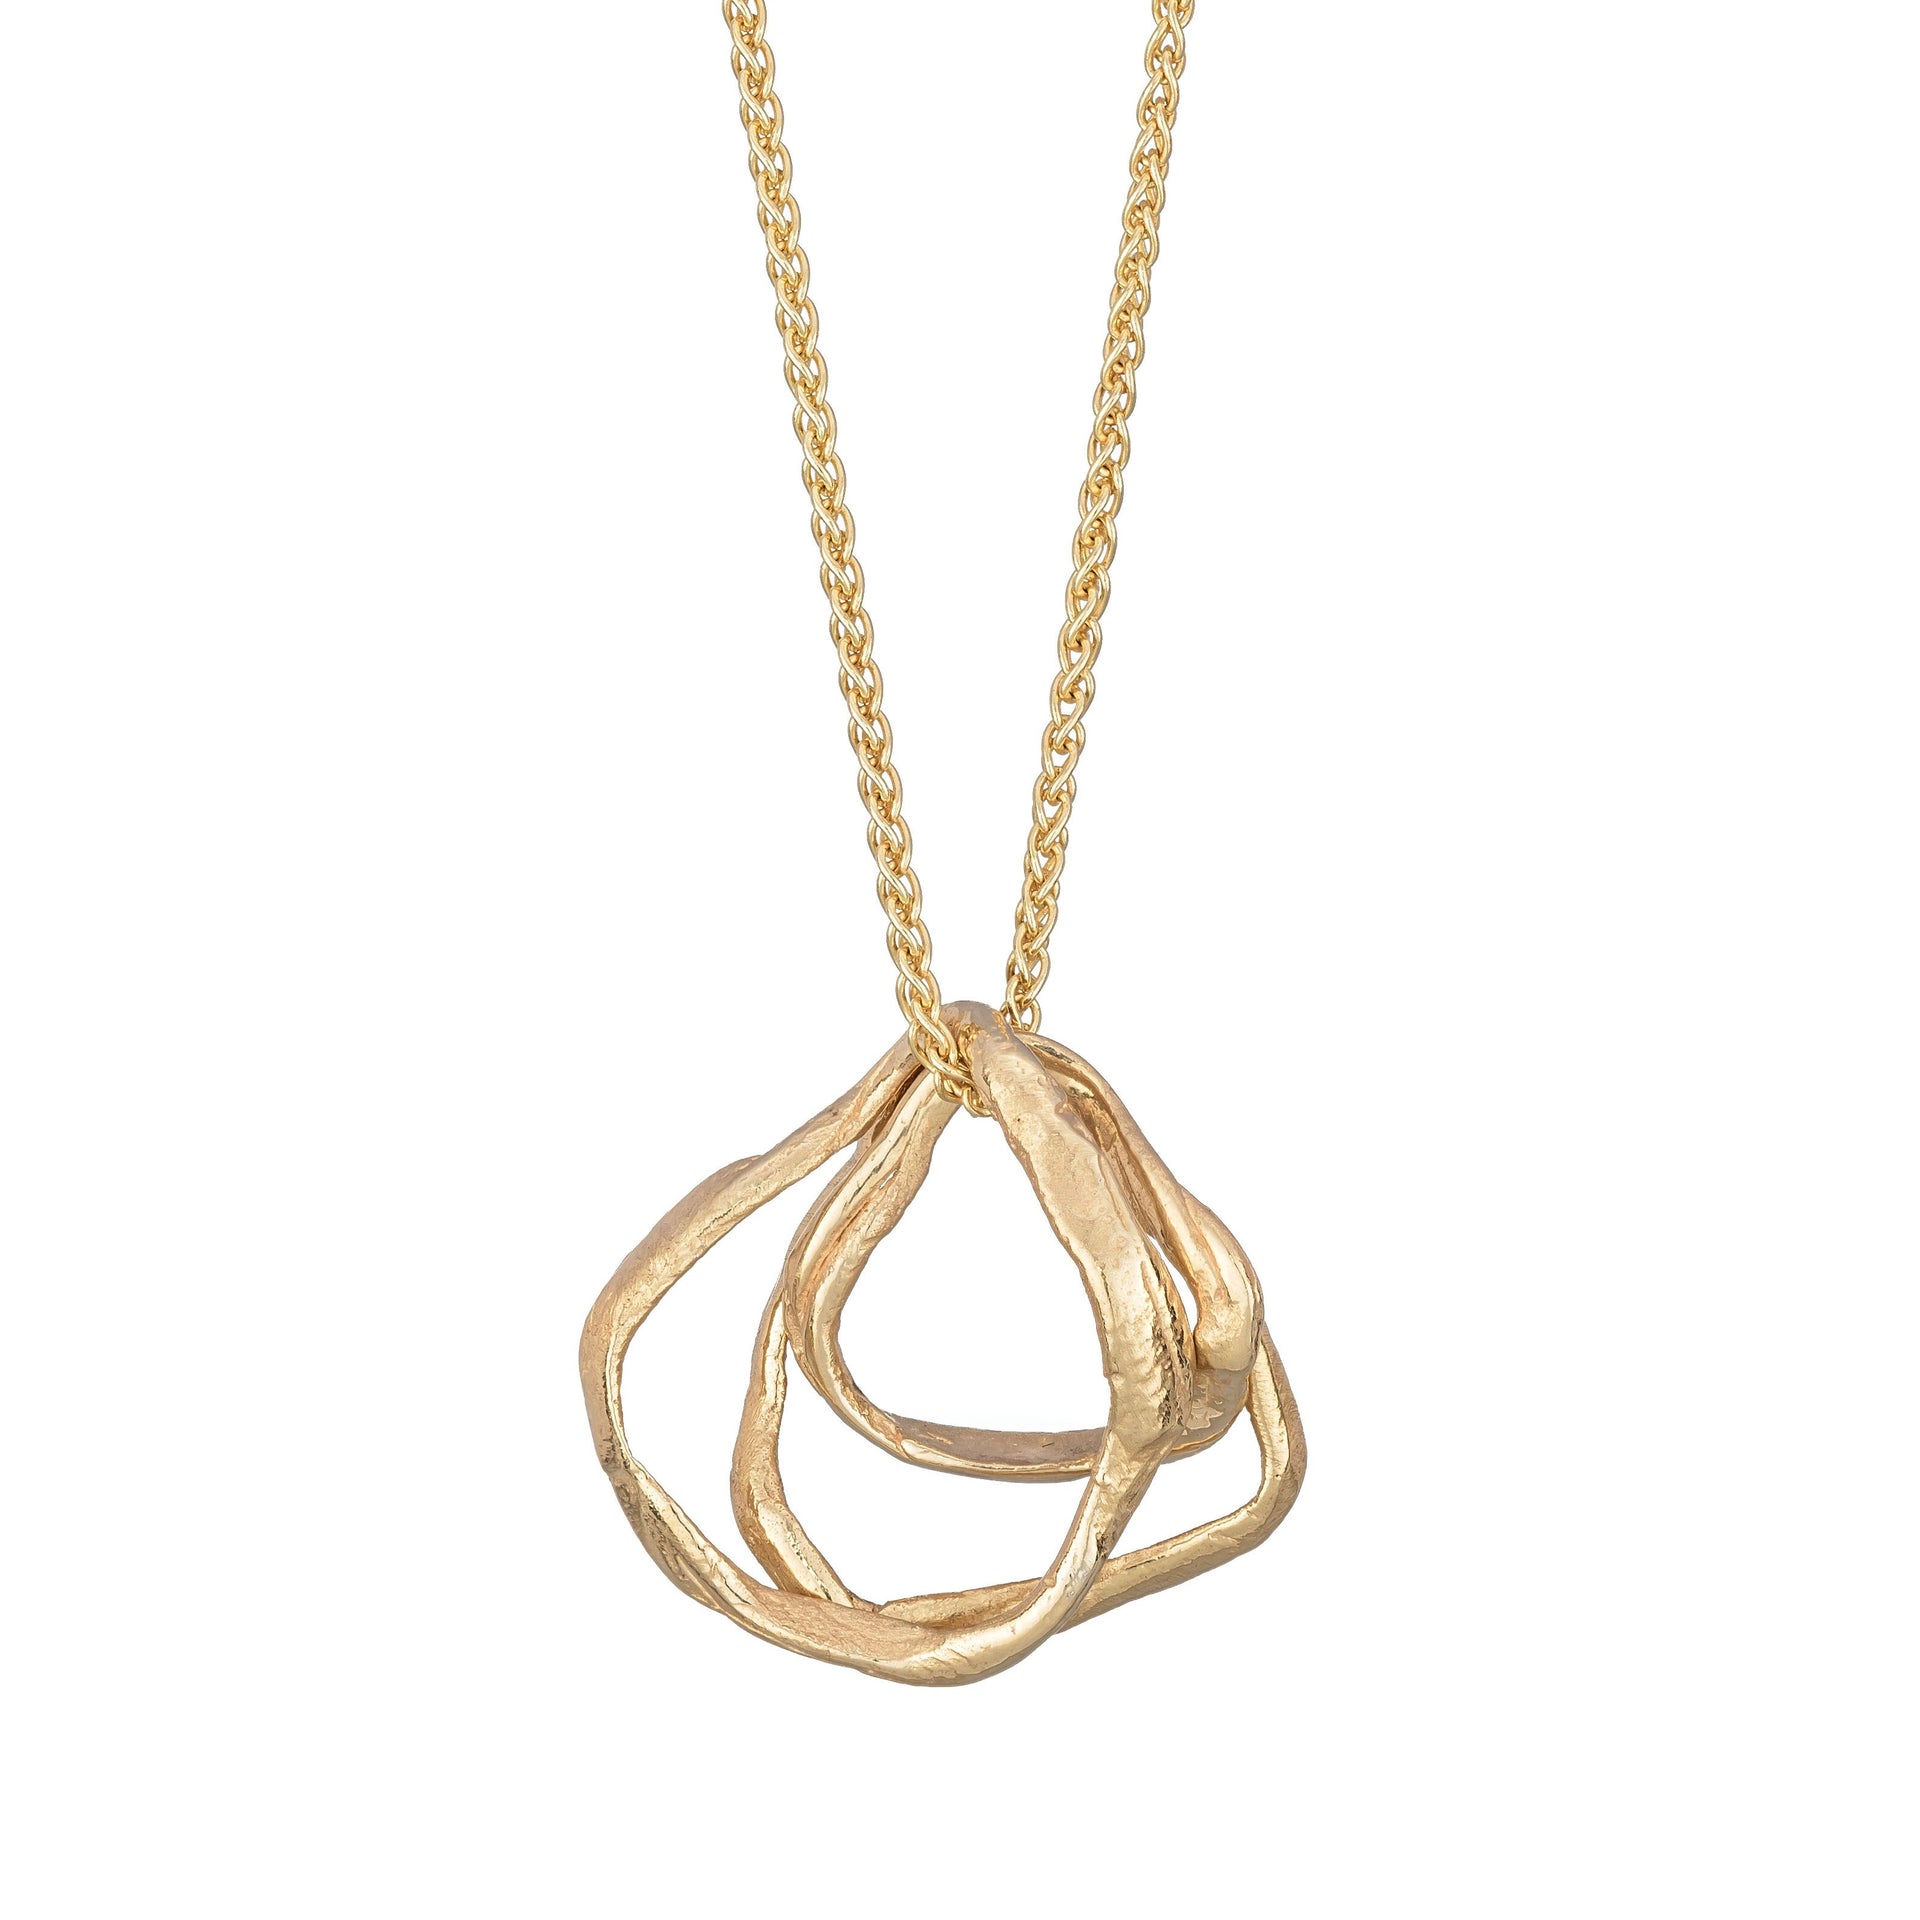 Three irregular solid gold loops move freely on a fine solid gold chain, making a pleasing cluster that gently clink together as they move. Each loop of this unusual pendant is different, following the contours of individual pebbles picked up along Cornwall’s beaches. The loops measure between 1.5cm and 2cm across. A very tactile, effortlessly stylish pendant from this Cornish jewellery designer.